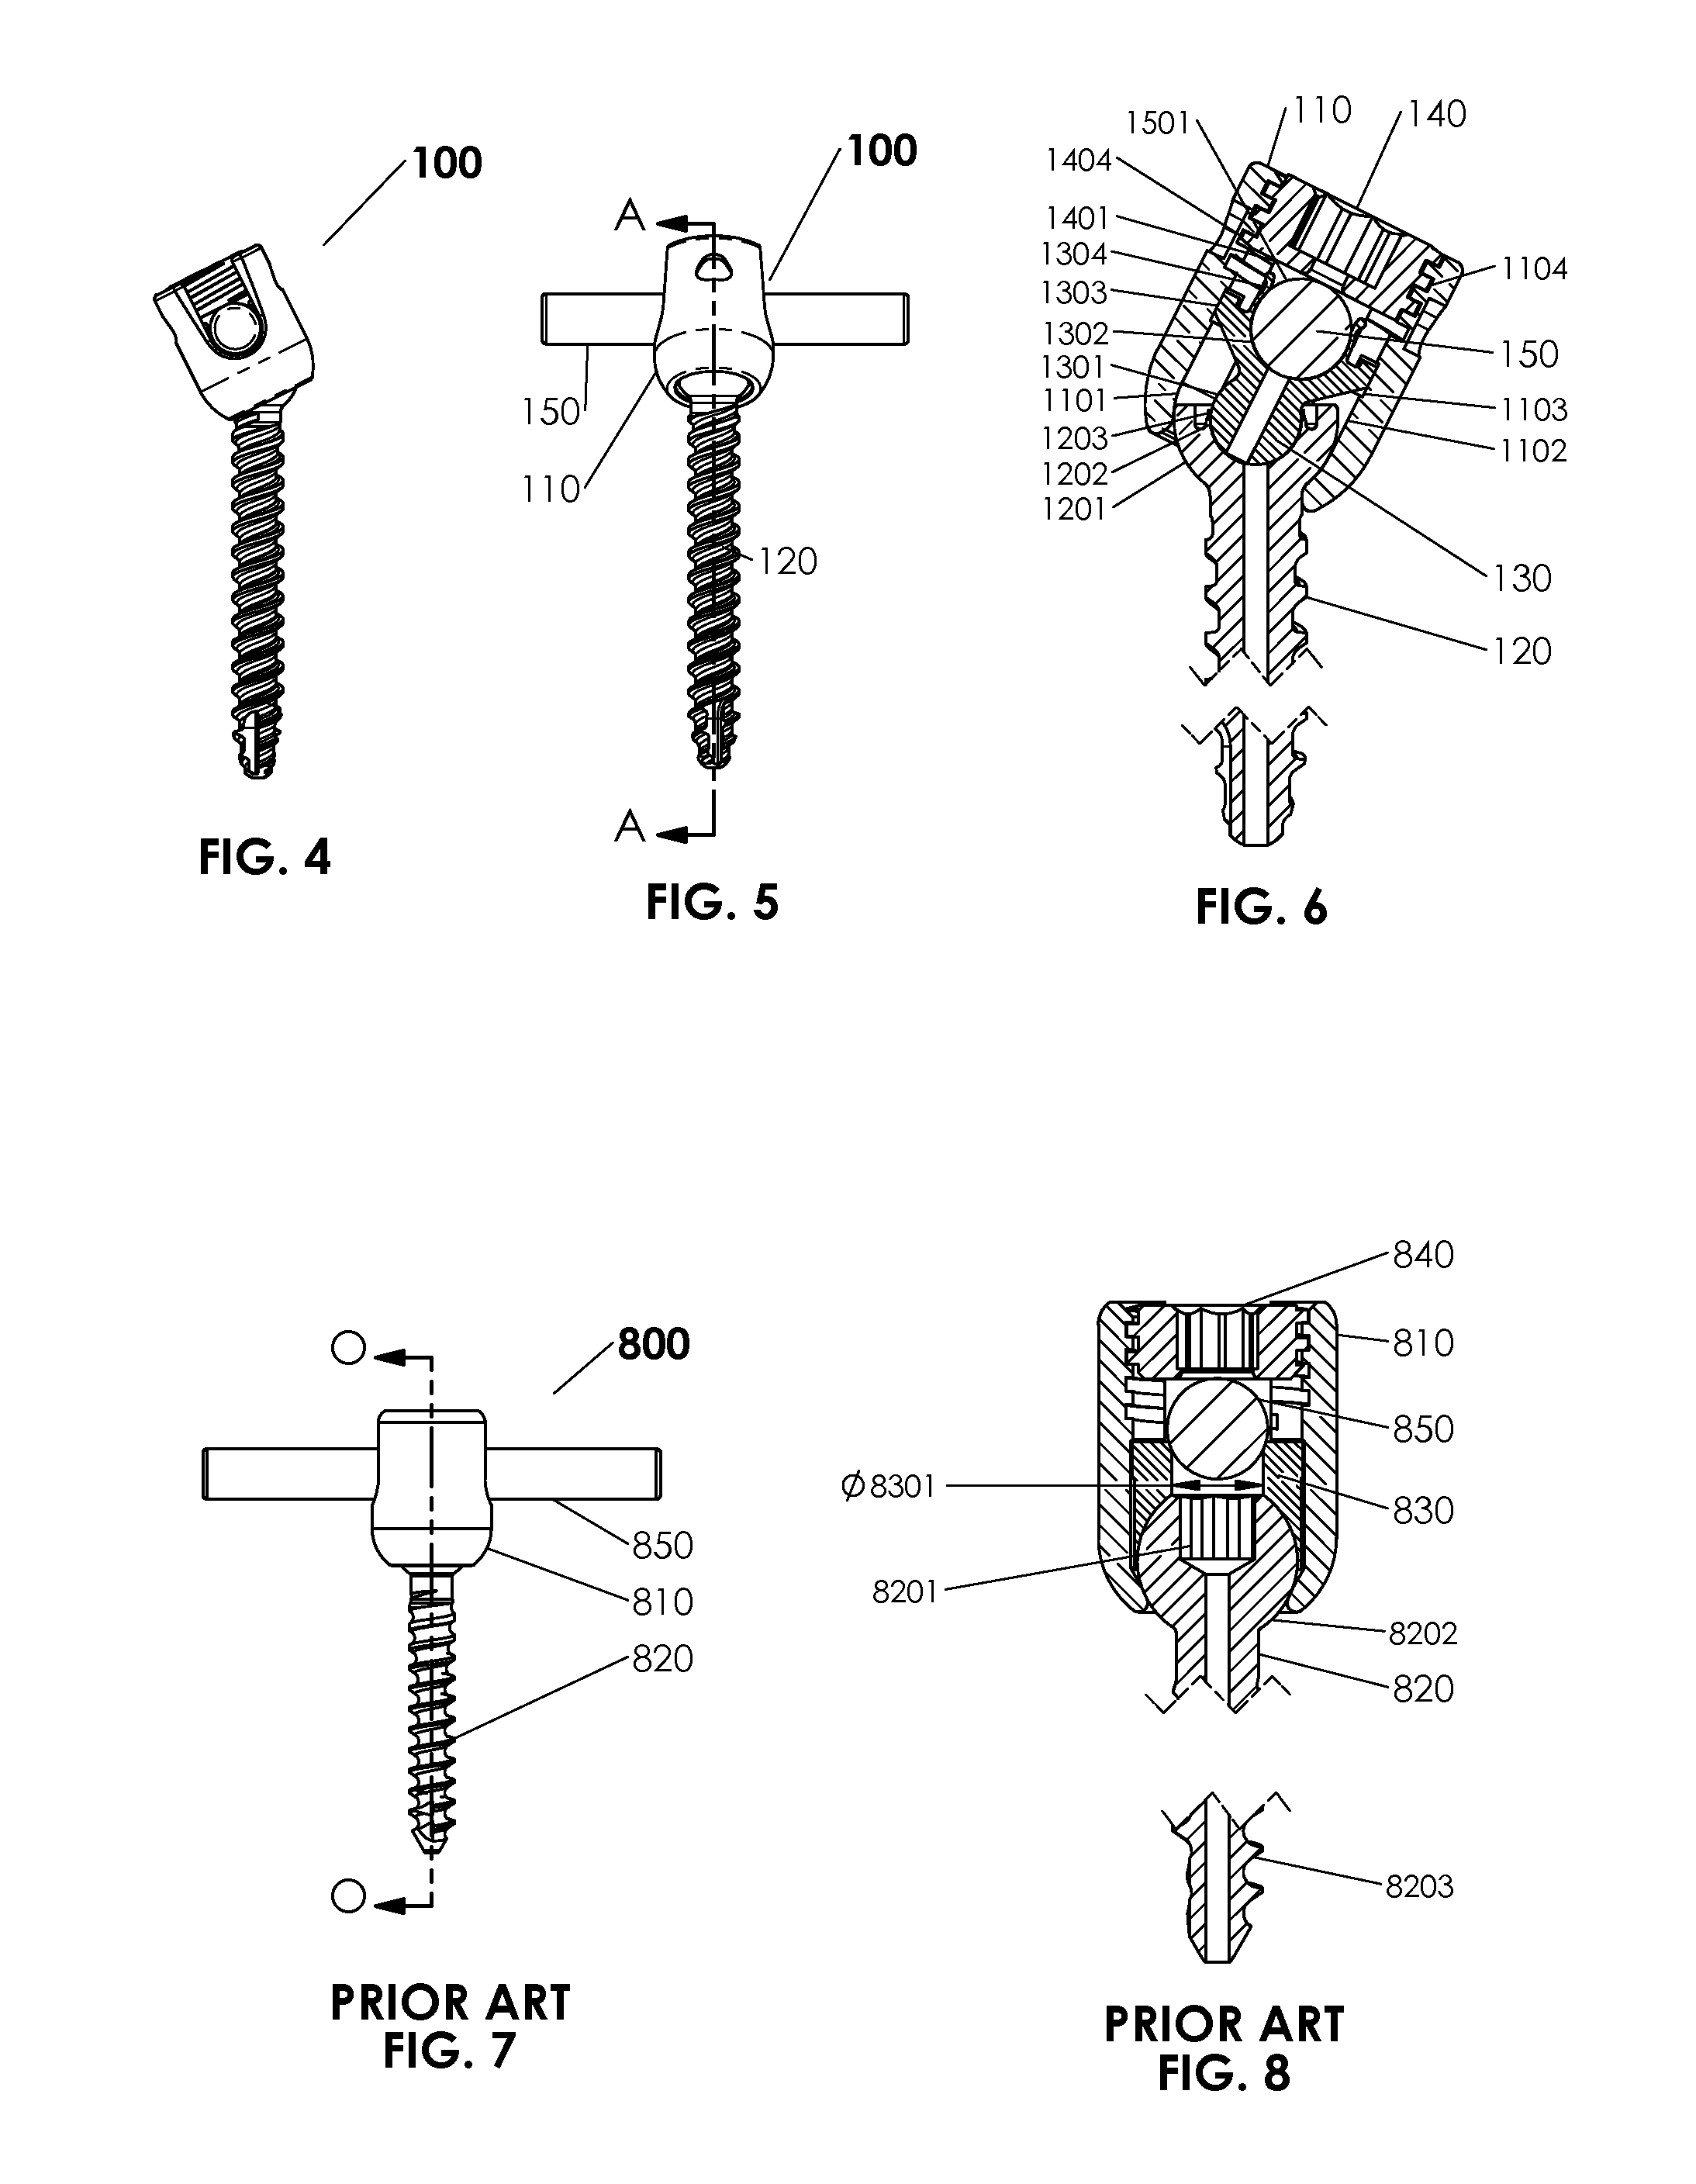 Spinal stabilization system